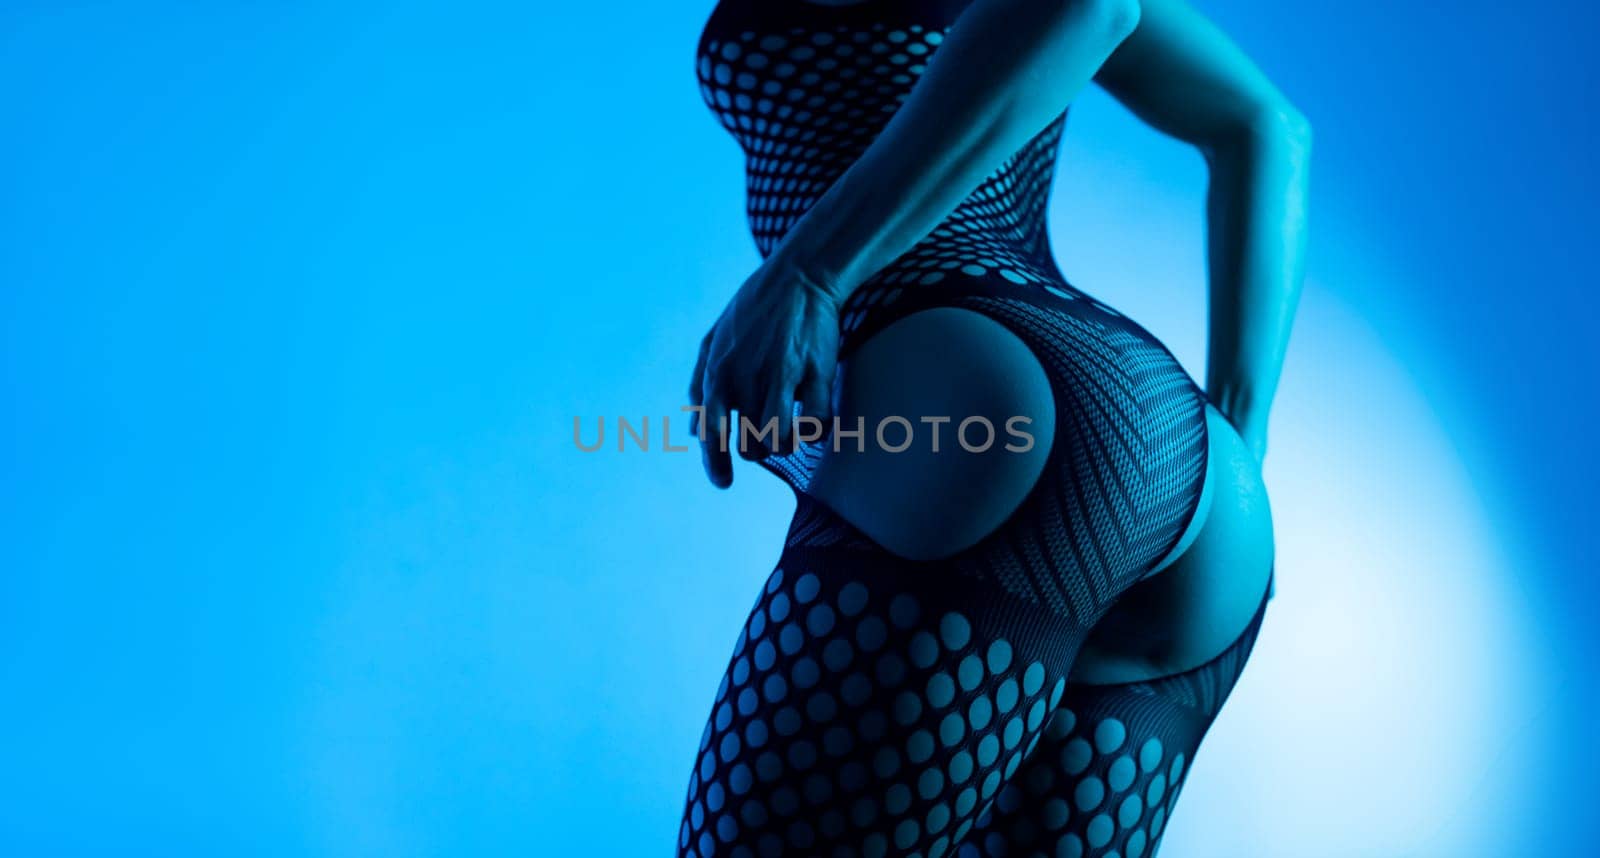 Sexy buttocks of a hot girl in close-up in erotic lingerie, mesh bodysuit with open crotch on a background copy paste in blue neon light